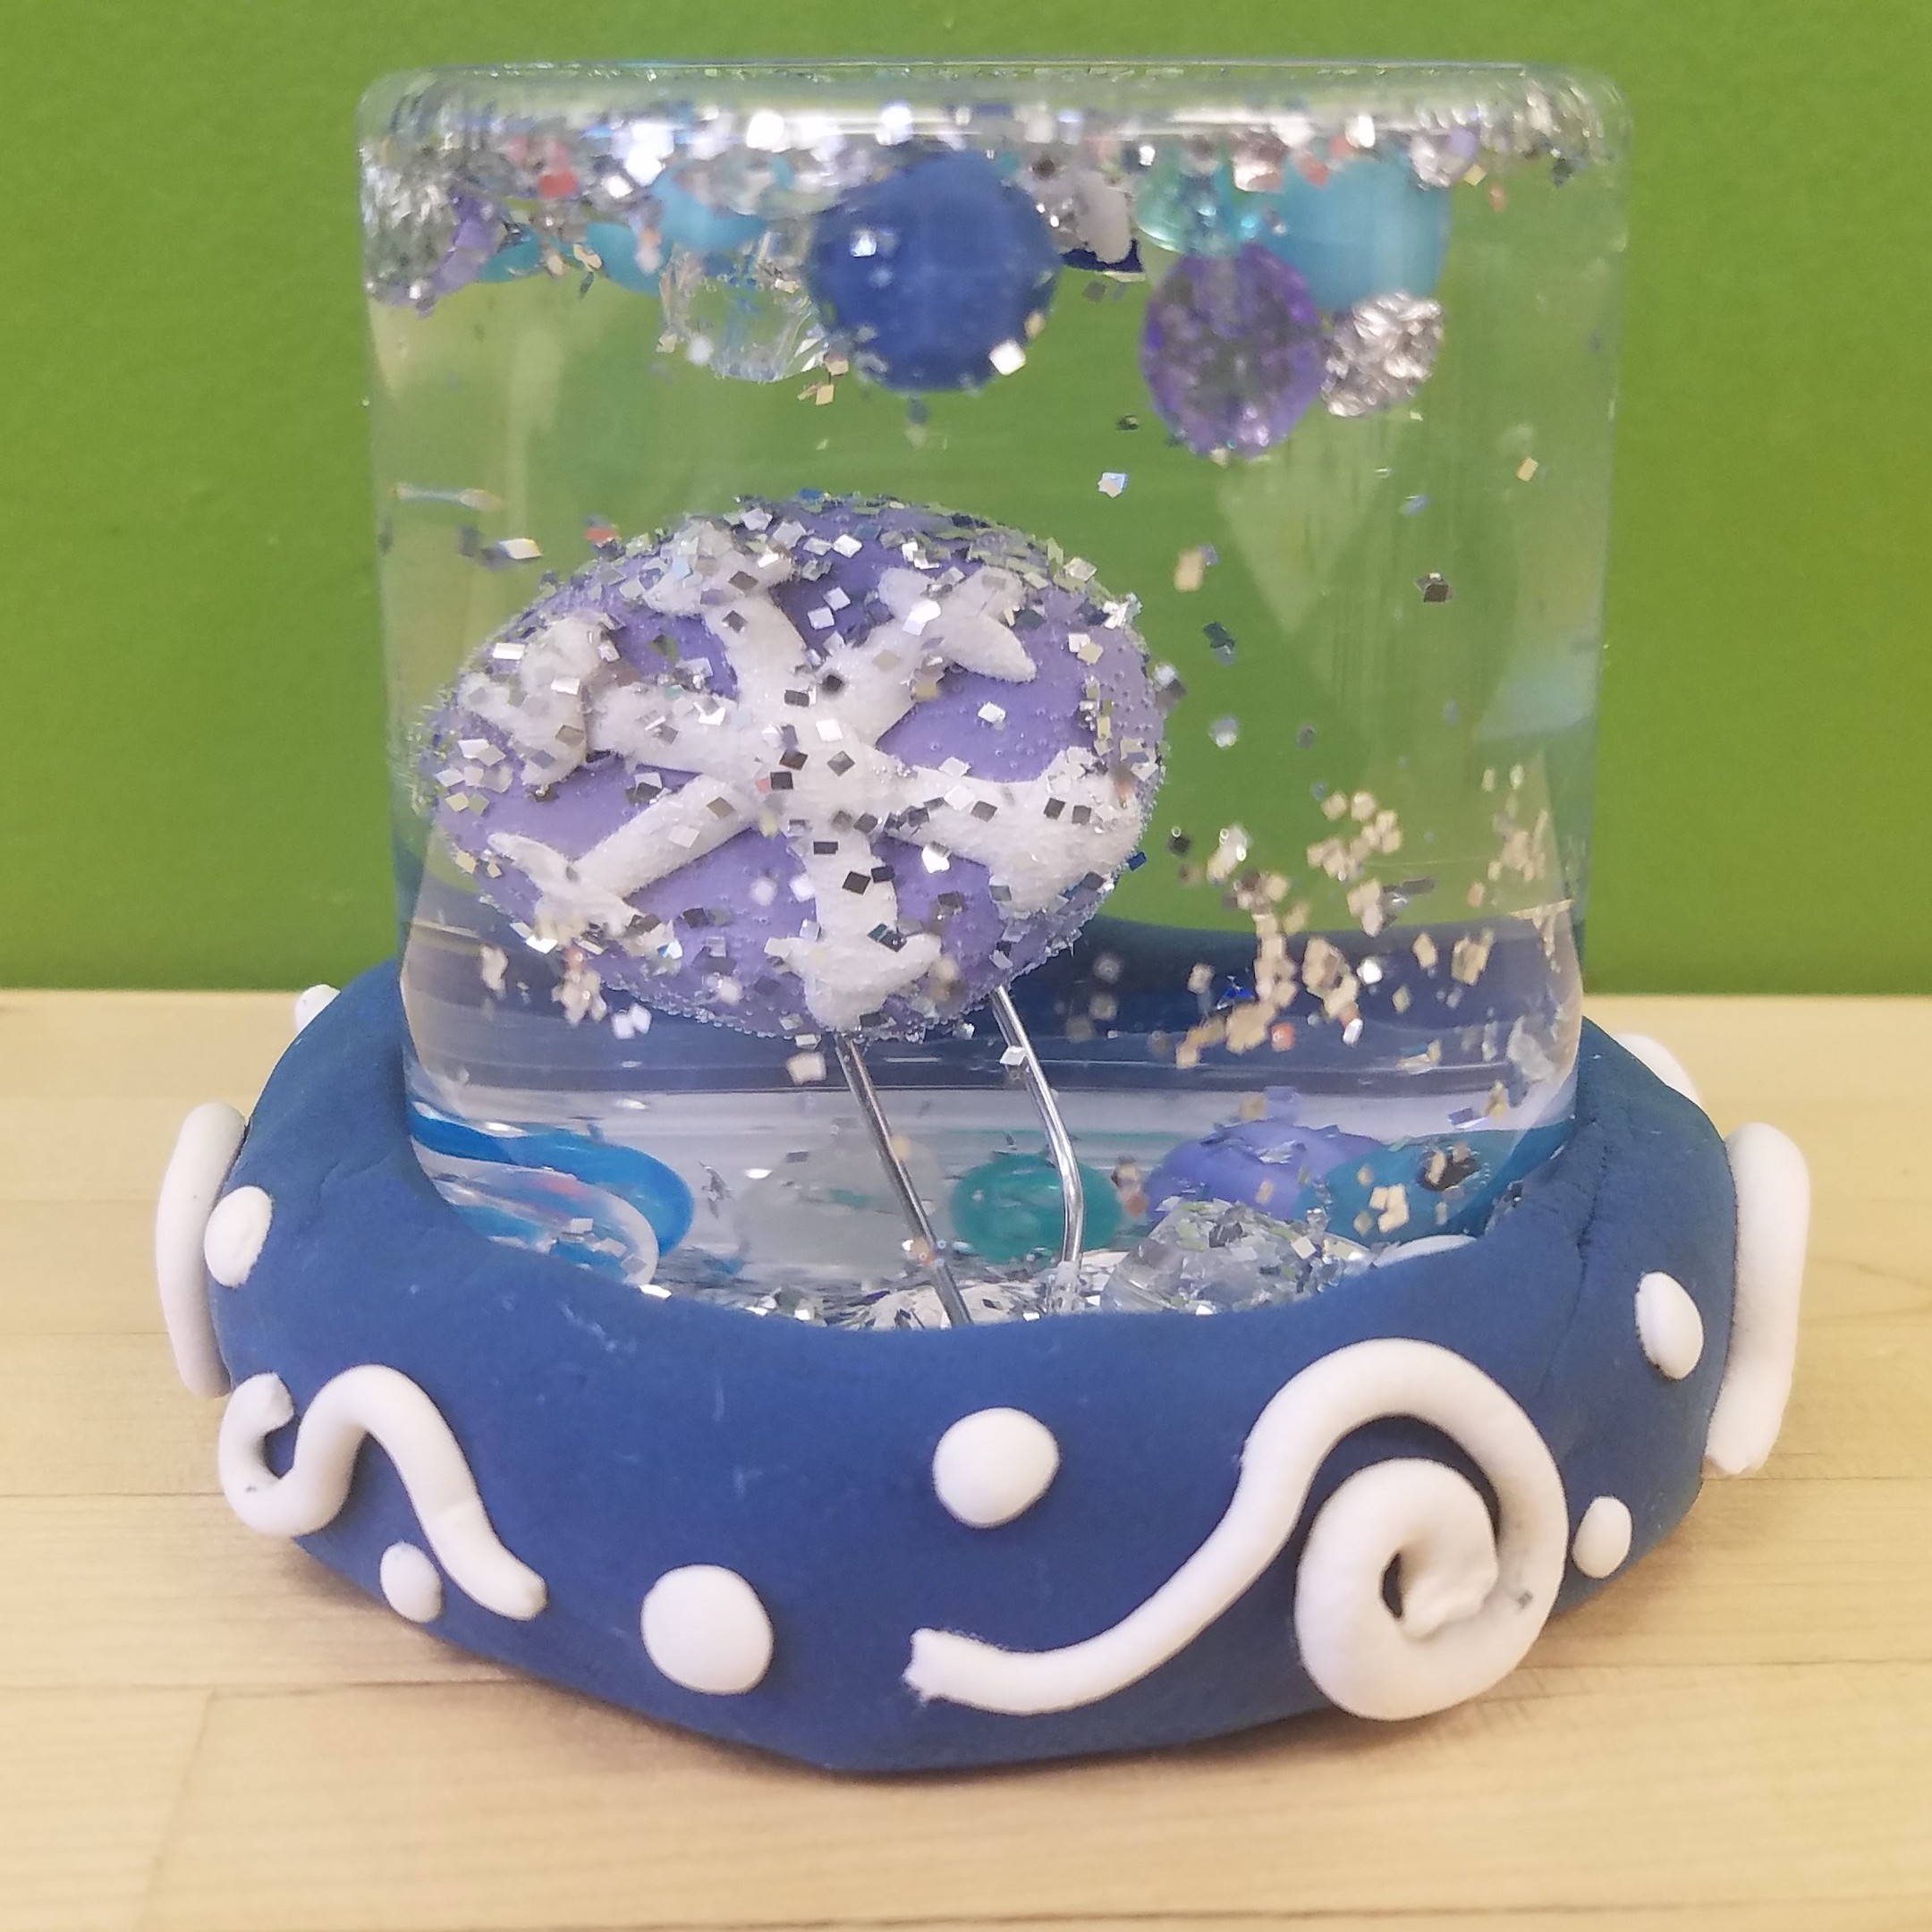 Kidcreate Studio - Mansfield, How to Make a Snow Globe Art Project